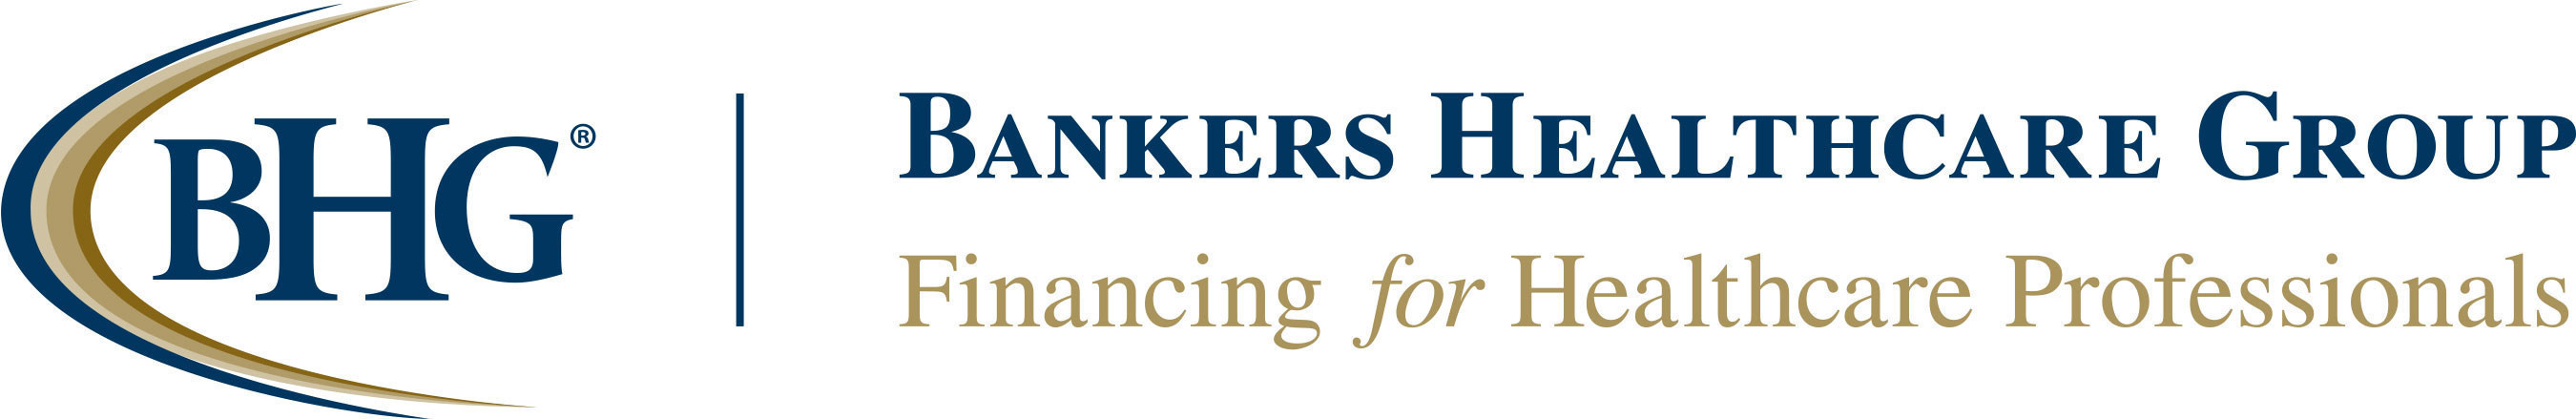 Since 2001, Bankers Healthcare Group has been committed to providing hassle-free financial solutions to healthcare professionals, including working capital loans, credit cards and insurance services. (PRNewsFoto/Bankers Healthcare Group)